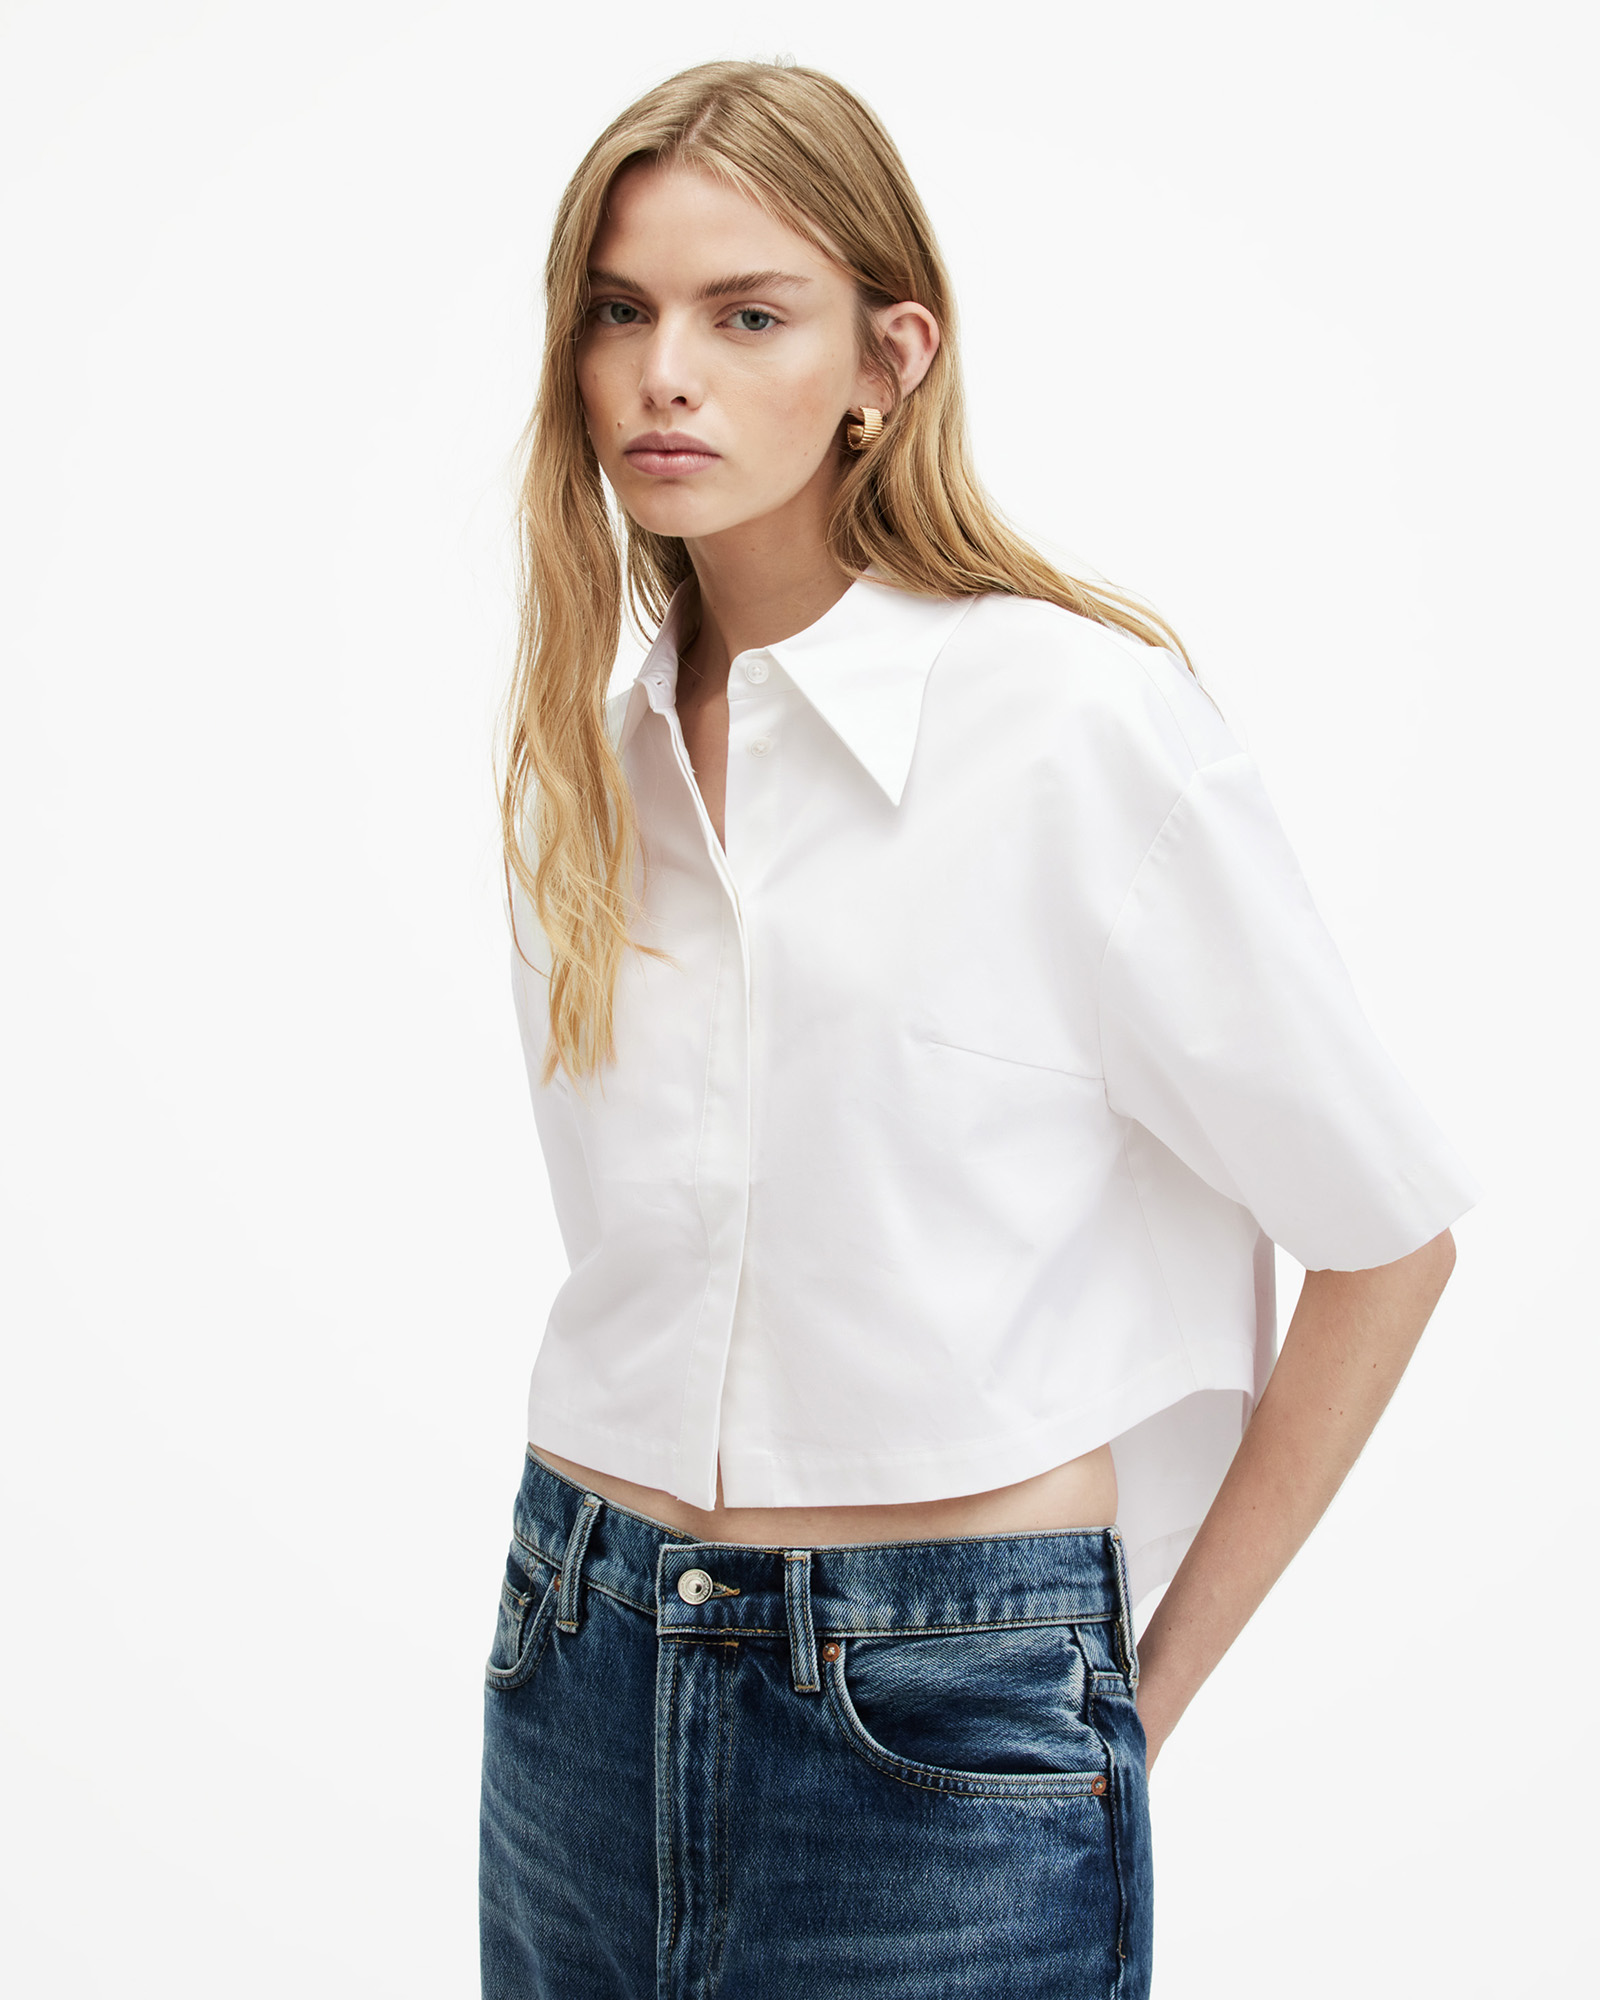 AllSaints Joanna Relaxed Fit Cropped Shirt,, White, Size: UK 12/US 8